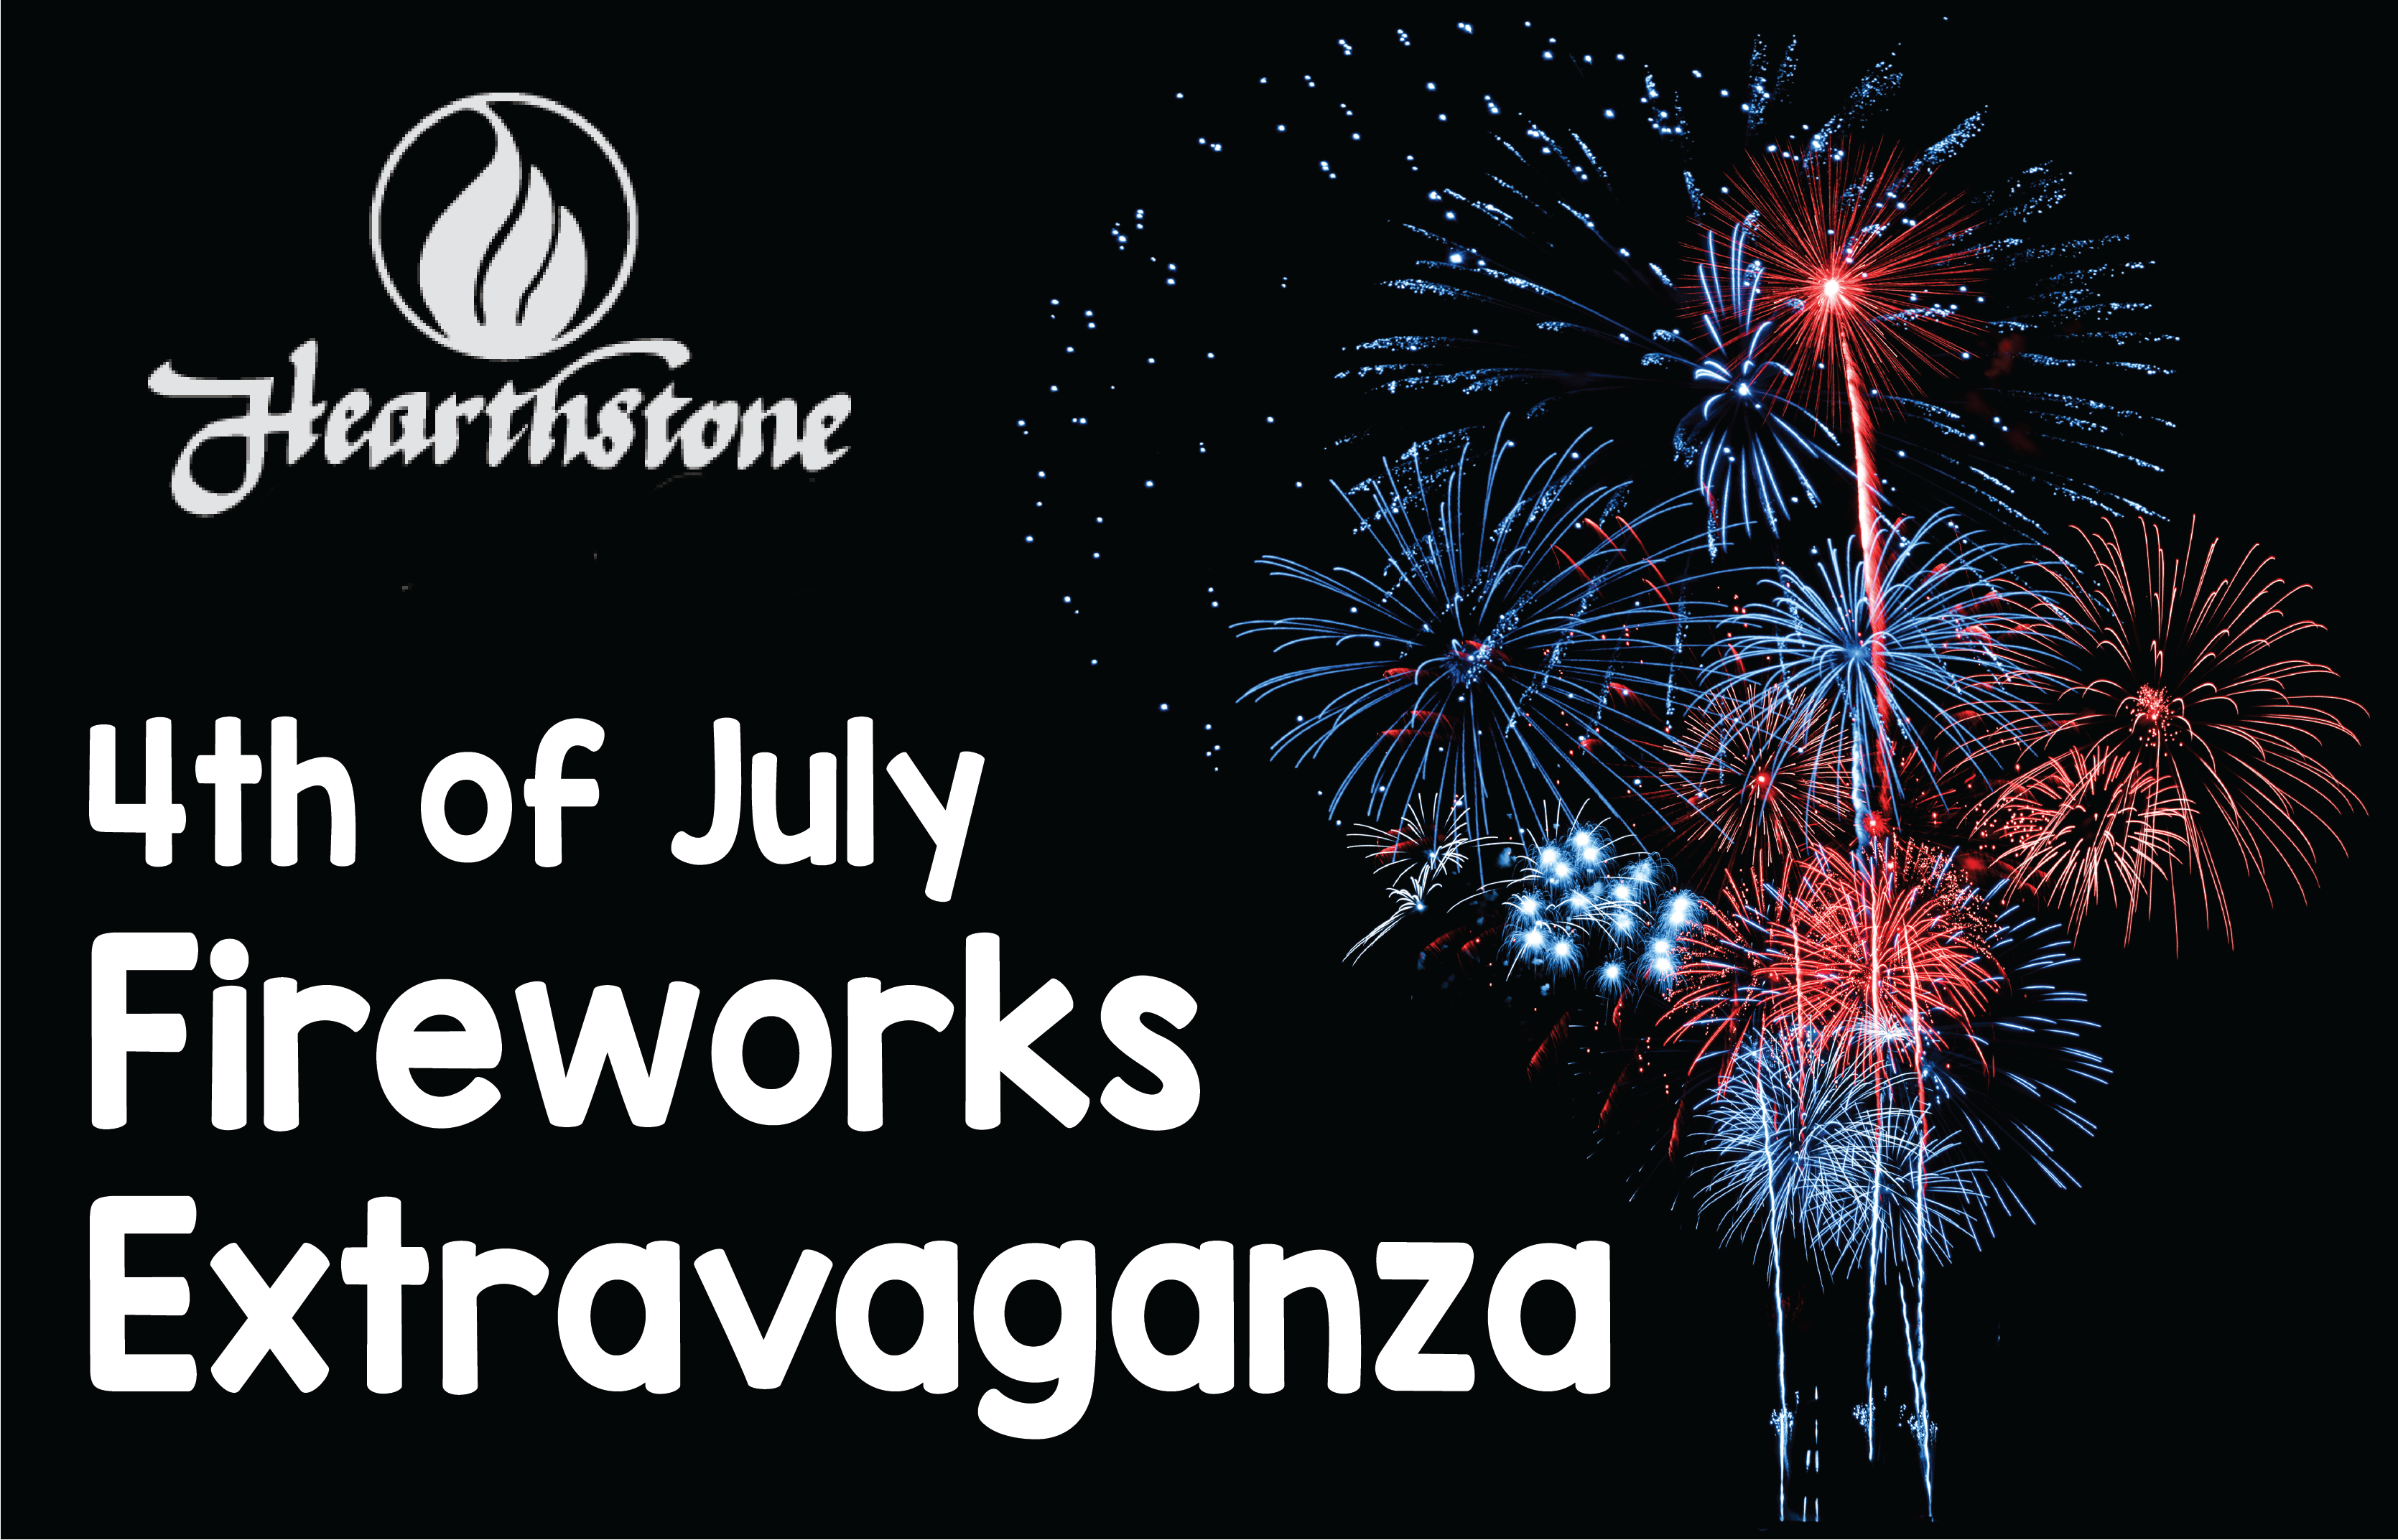 FINAL REMINDER:Get Ready to Light Up the Sky at the Hearthstone 4th of July Fireworks Extravaganza